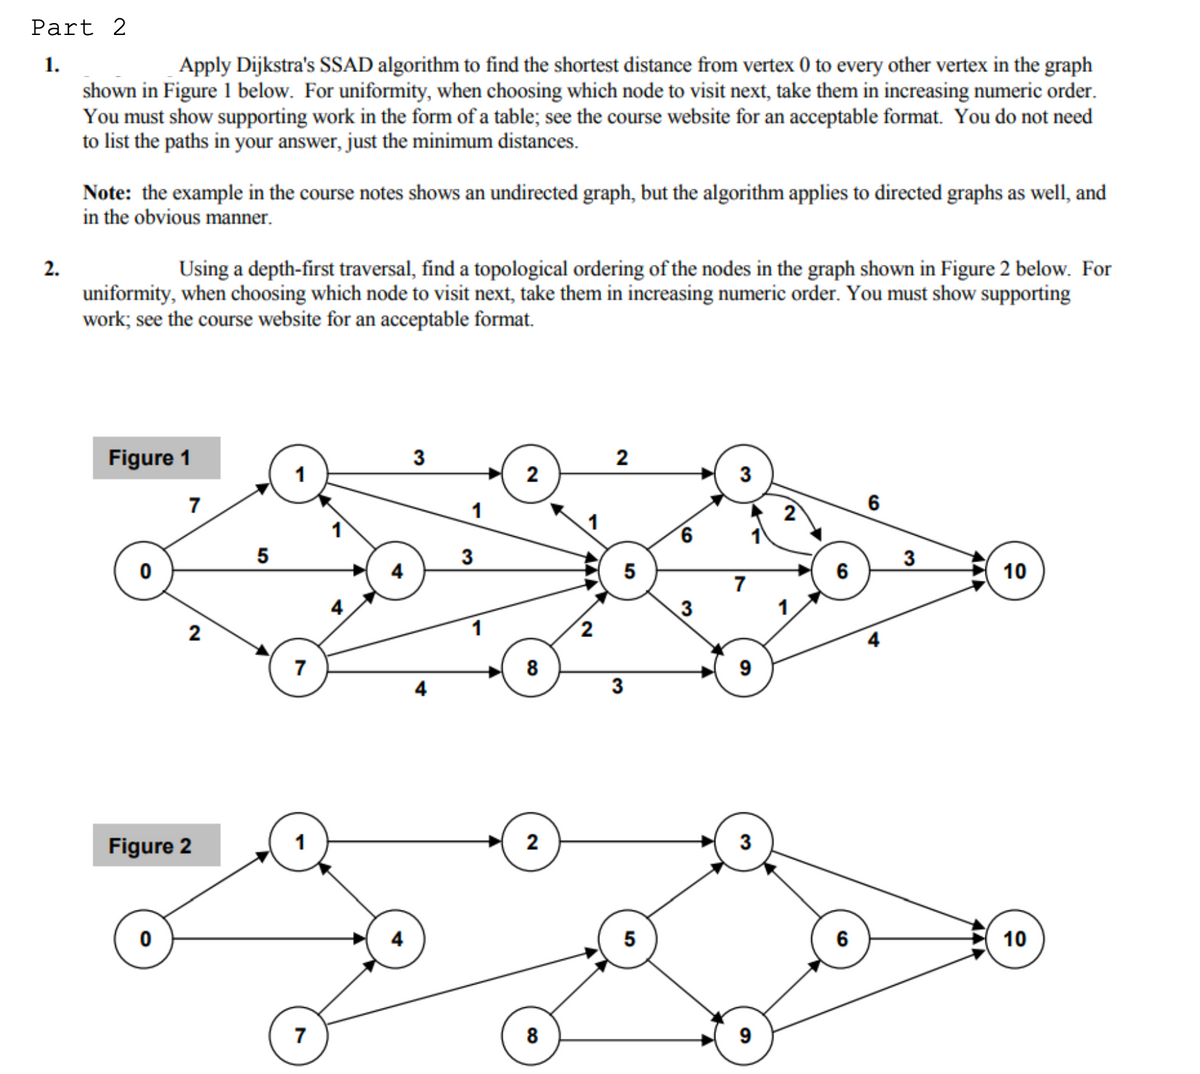 Part 2
1.
2.
Apply Dijkstra's SSAD algorithm to find the shortest distance from vertex 0 to every other vertex in the graph
shown in Figure 1 below. For uniformity, when choosing which node to visit next, take them in increasing numeric order.
You must show supporting work in the form of a table; see the course website for an acceptable format. You do not need
to list the paths in your answer, just the minimum distances.
Note: the example in the course notes shows an undirected graph, but the algorithm applies to directed graphs as well, and
in the obvious manner.
Using a depth-first traversal, find a topological ordering of the nodes in the graph shown in Figure 2 below. For
uniformity, when choosing which node to visit next, take them in increasing numeric order. You must show supporting
work; see the course website for an acceptable format.
Figure 1
0
7
0
2
Figure 2
5
1
7
1
7
4
4
3
1
3
2
8
2
8
2
5
3
5
6
3
3
7
9
3
9
N
6
6
6
3
10
10